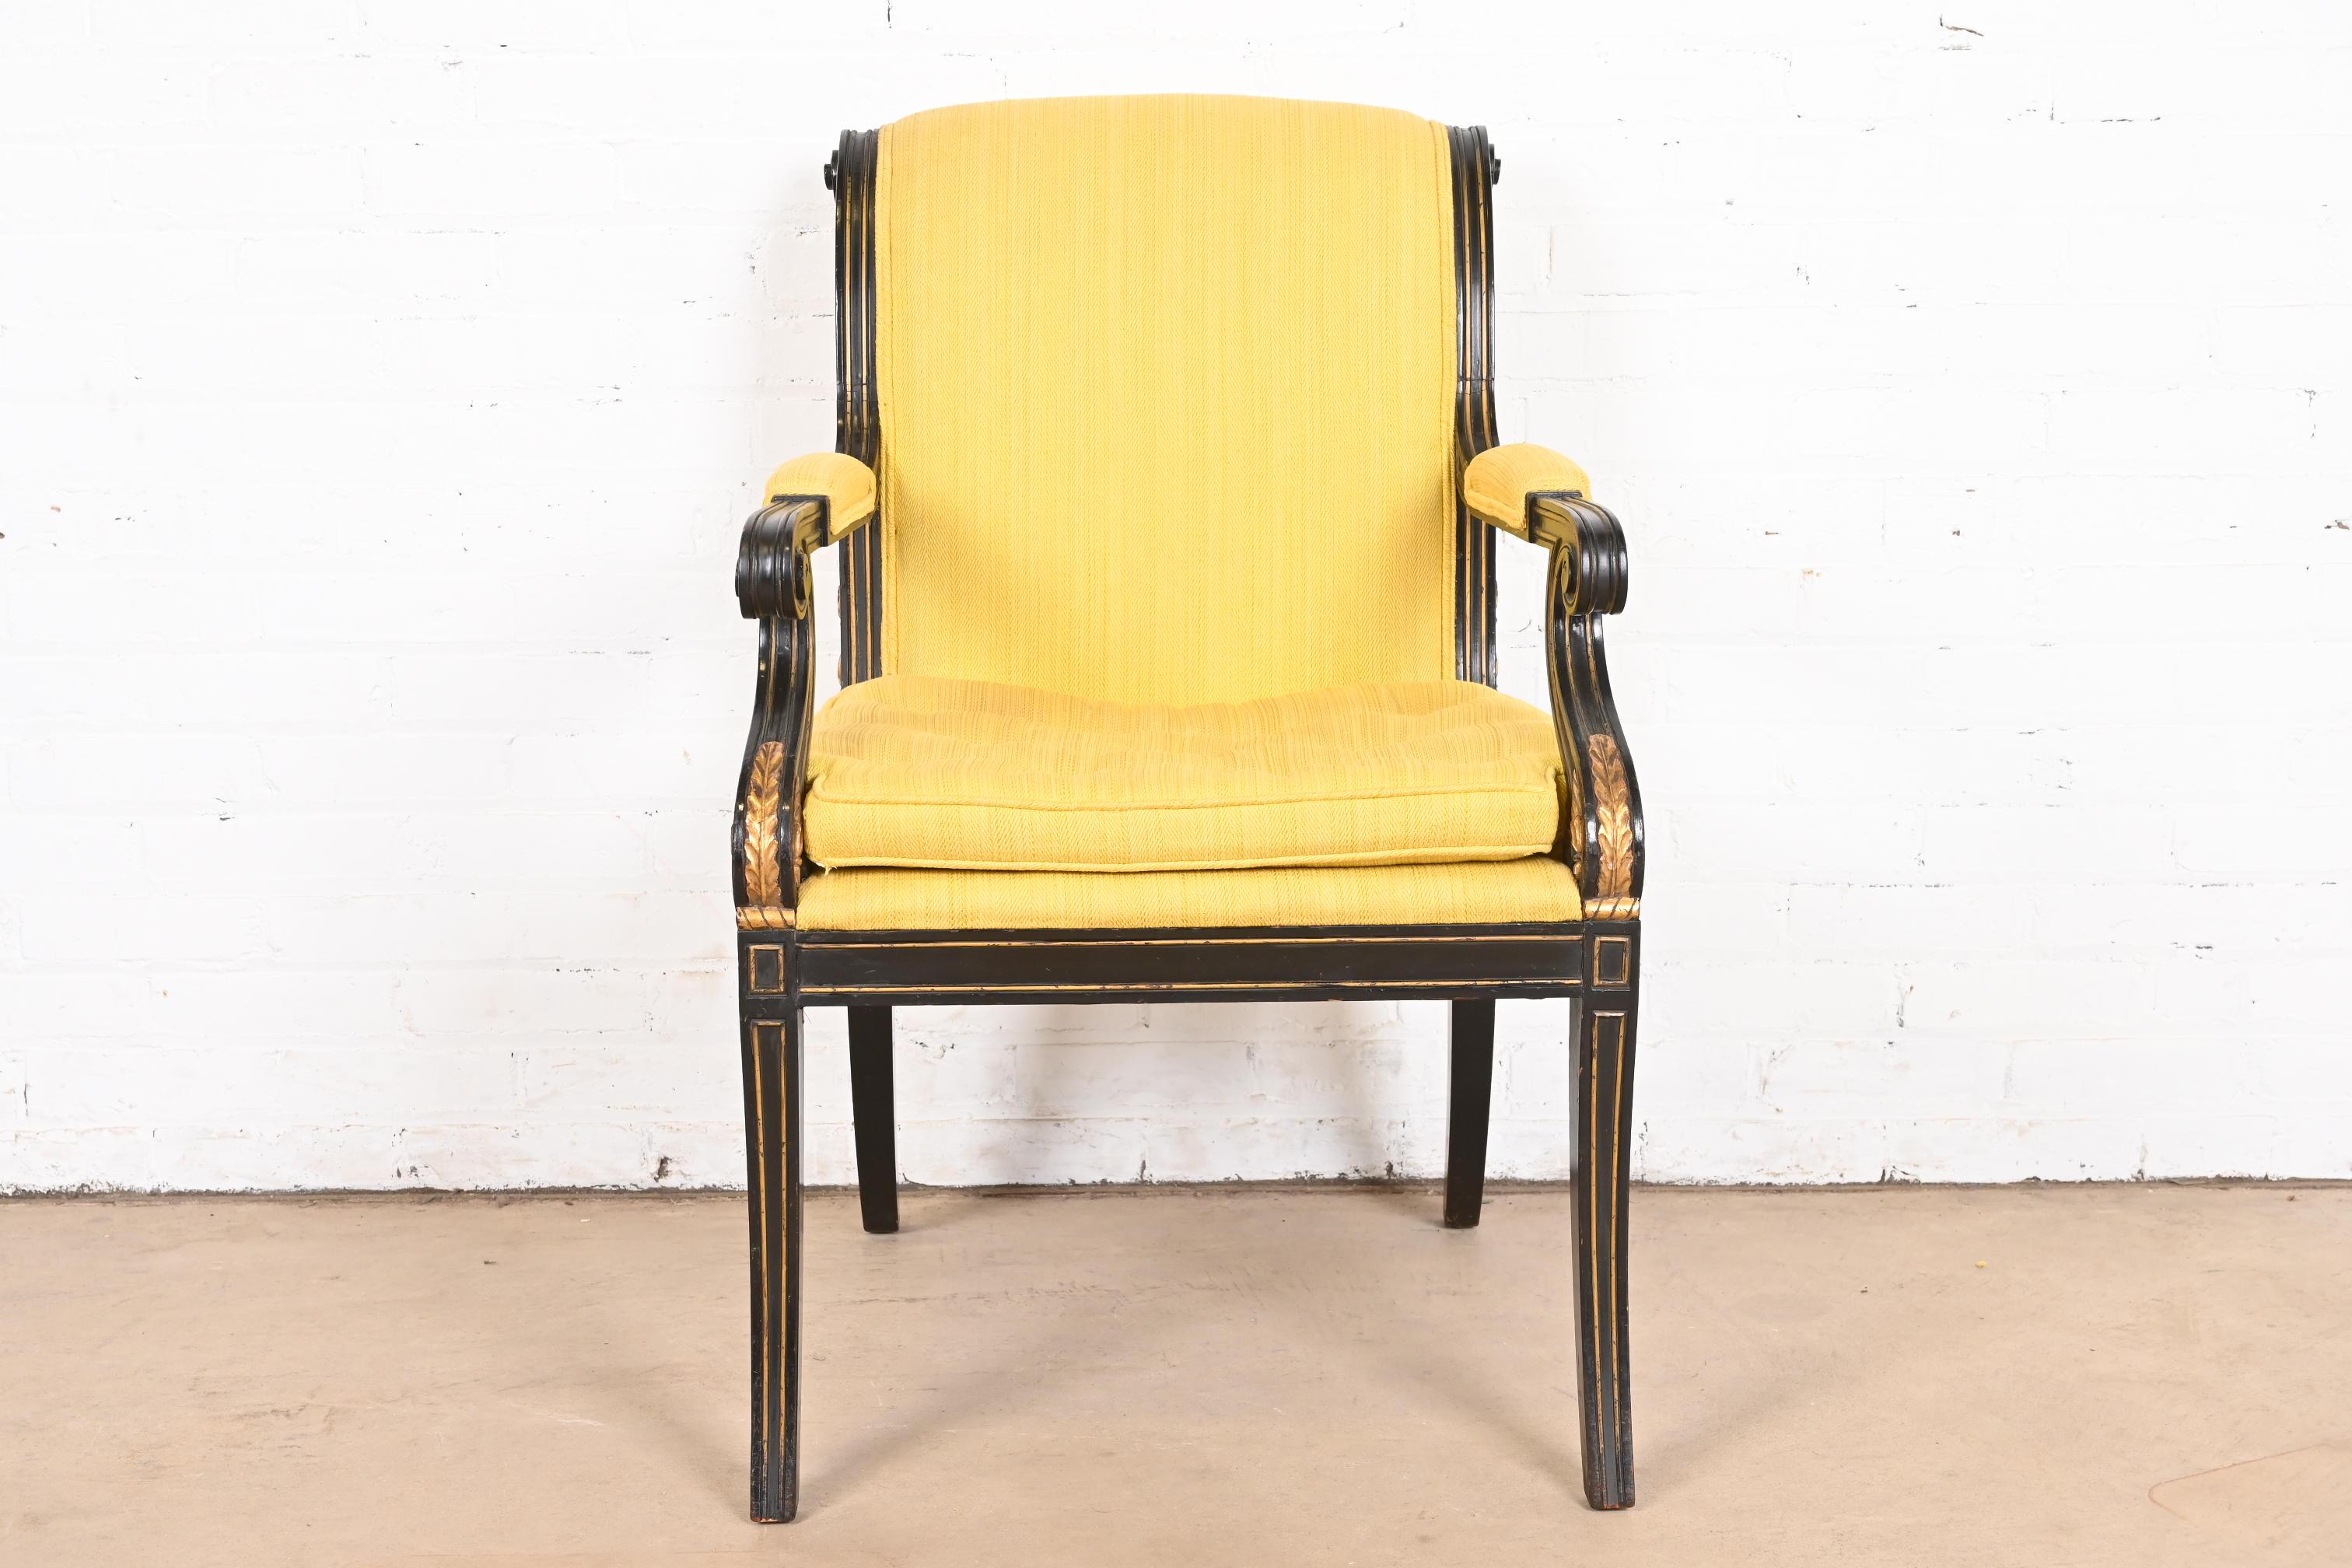 Baker Furniture Style Regency Ebonized and Gold Gilt Armchair In Good Condition For Sale In South Bend, IN